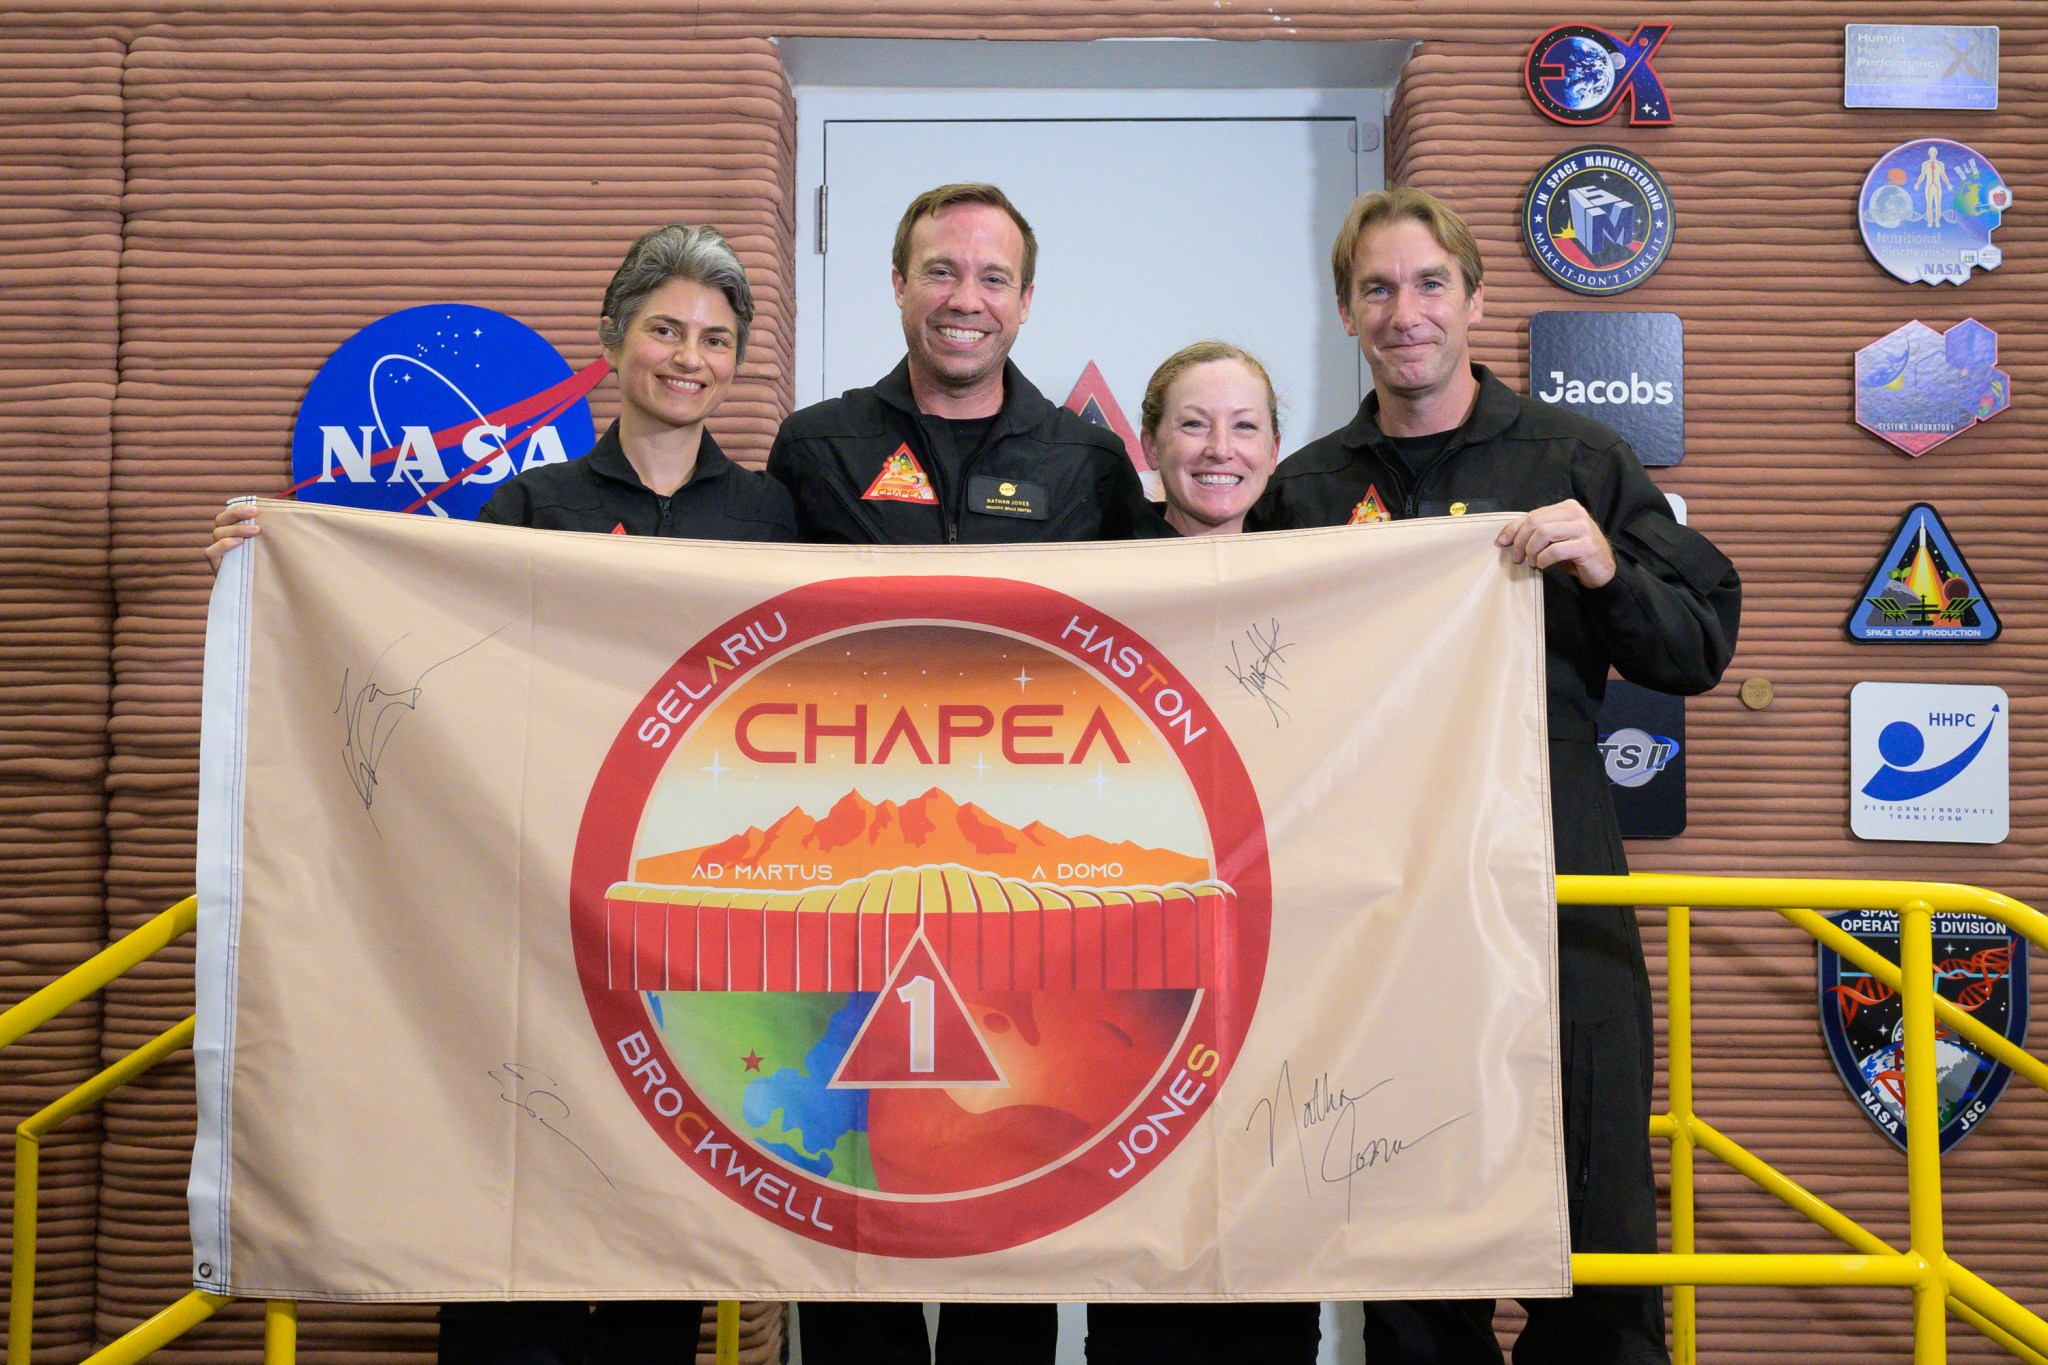 The CHAPEA mission 1 crew poses with a flag featuring their mission patch surrounded by their signatures.